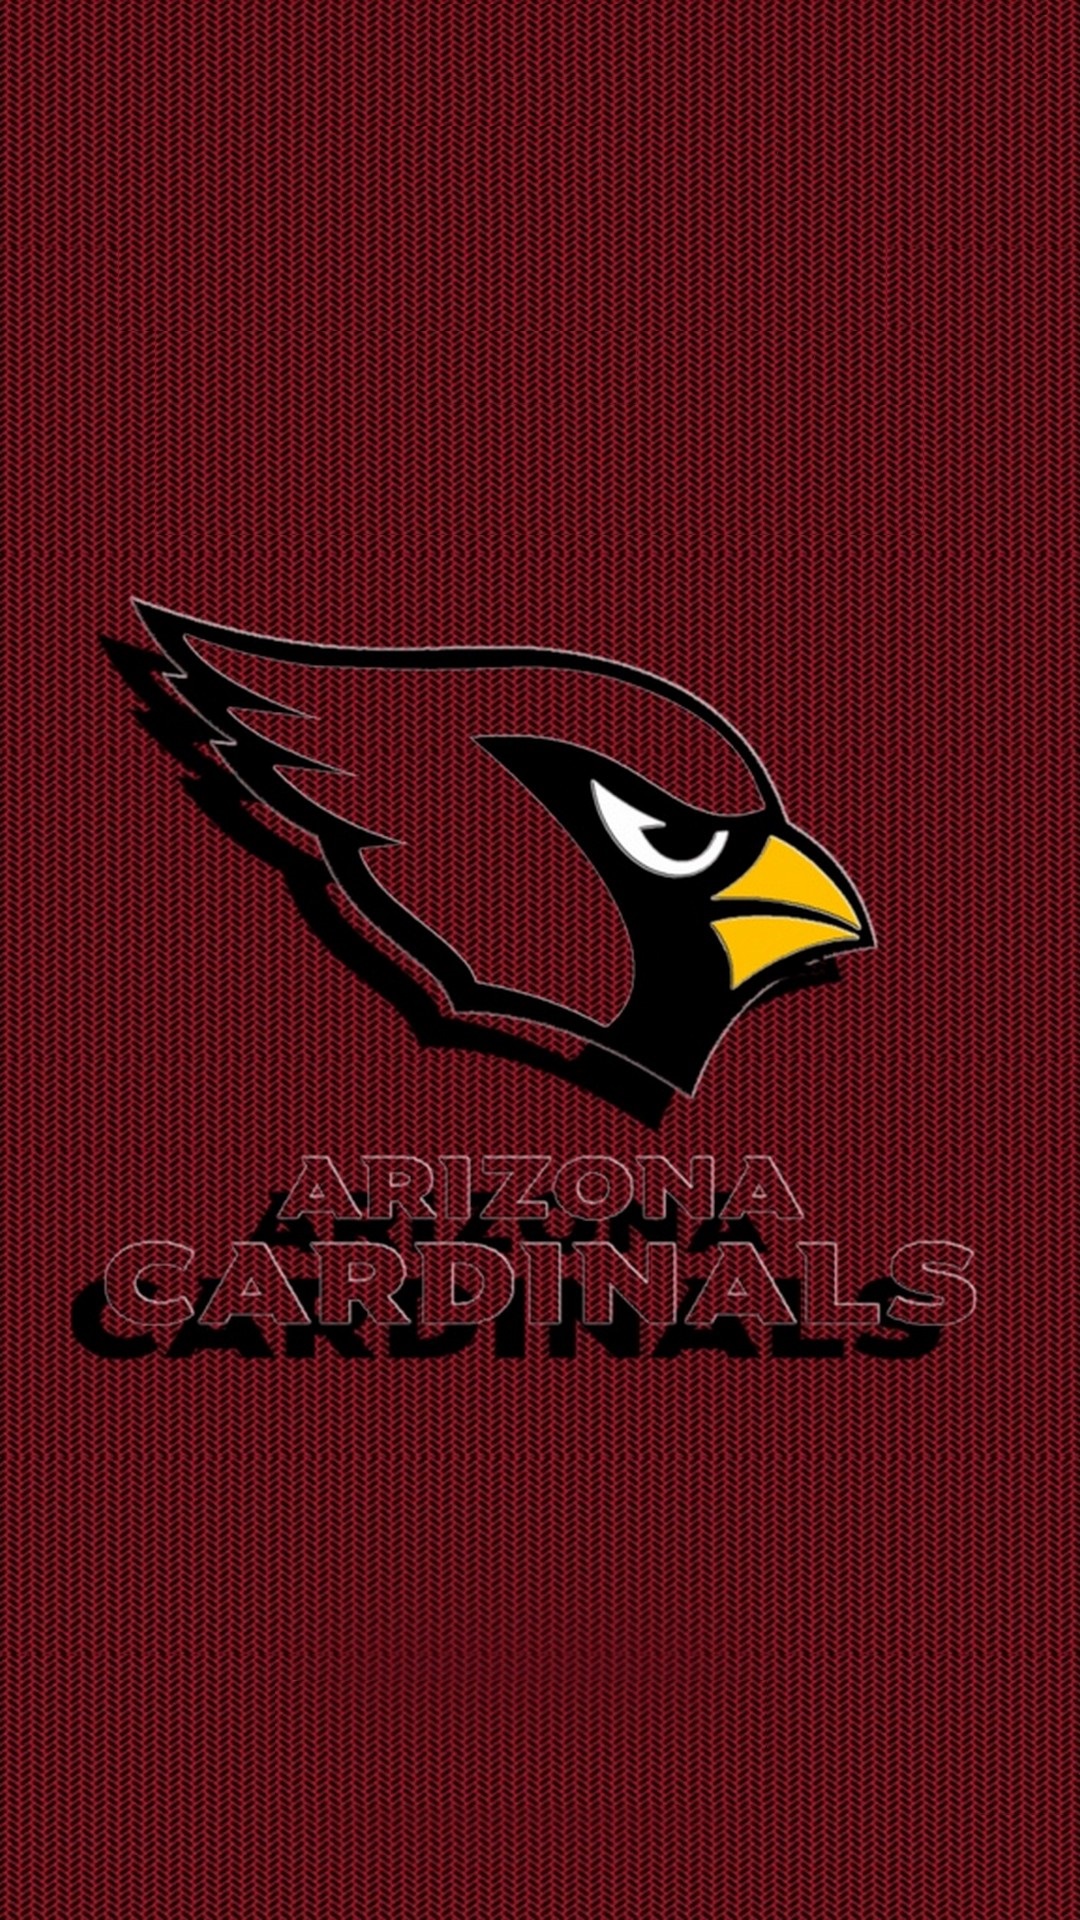 Arizona Cardinals iPhone Apple Wallpaper With high-resolution 1080X1920 pixel. Donwload and set as wallpaper for your iPhone X, iPhone XS home screen backgrounds, XS Max, XR, iPhone8 lock screen wallpaper, iPhone 7, 6, SE, and other mobile devices